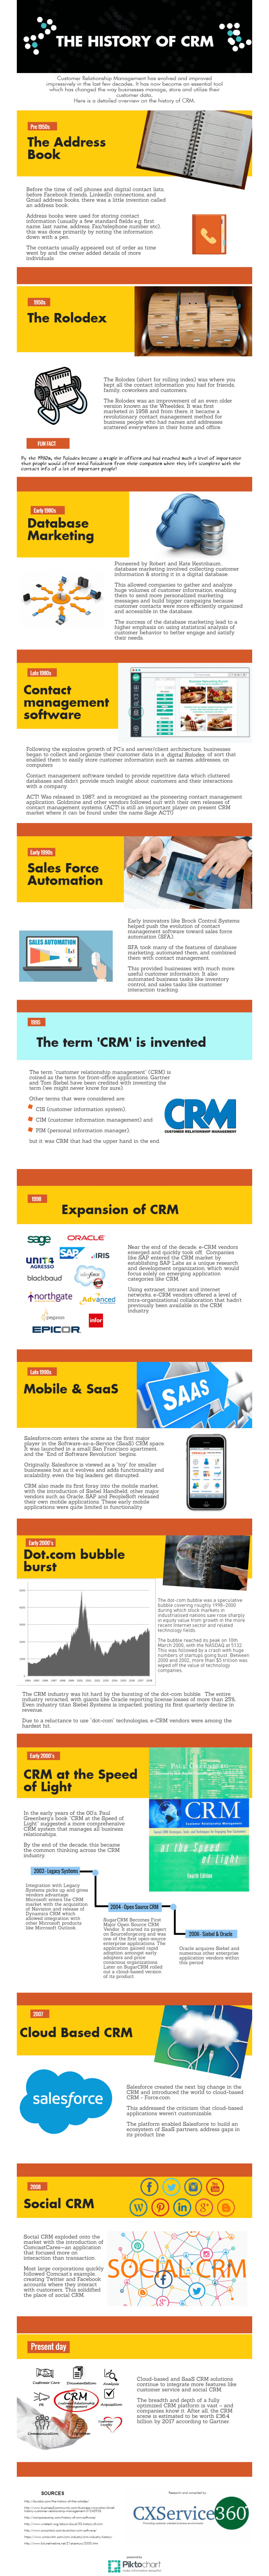 The History Of Crm Infographic